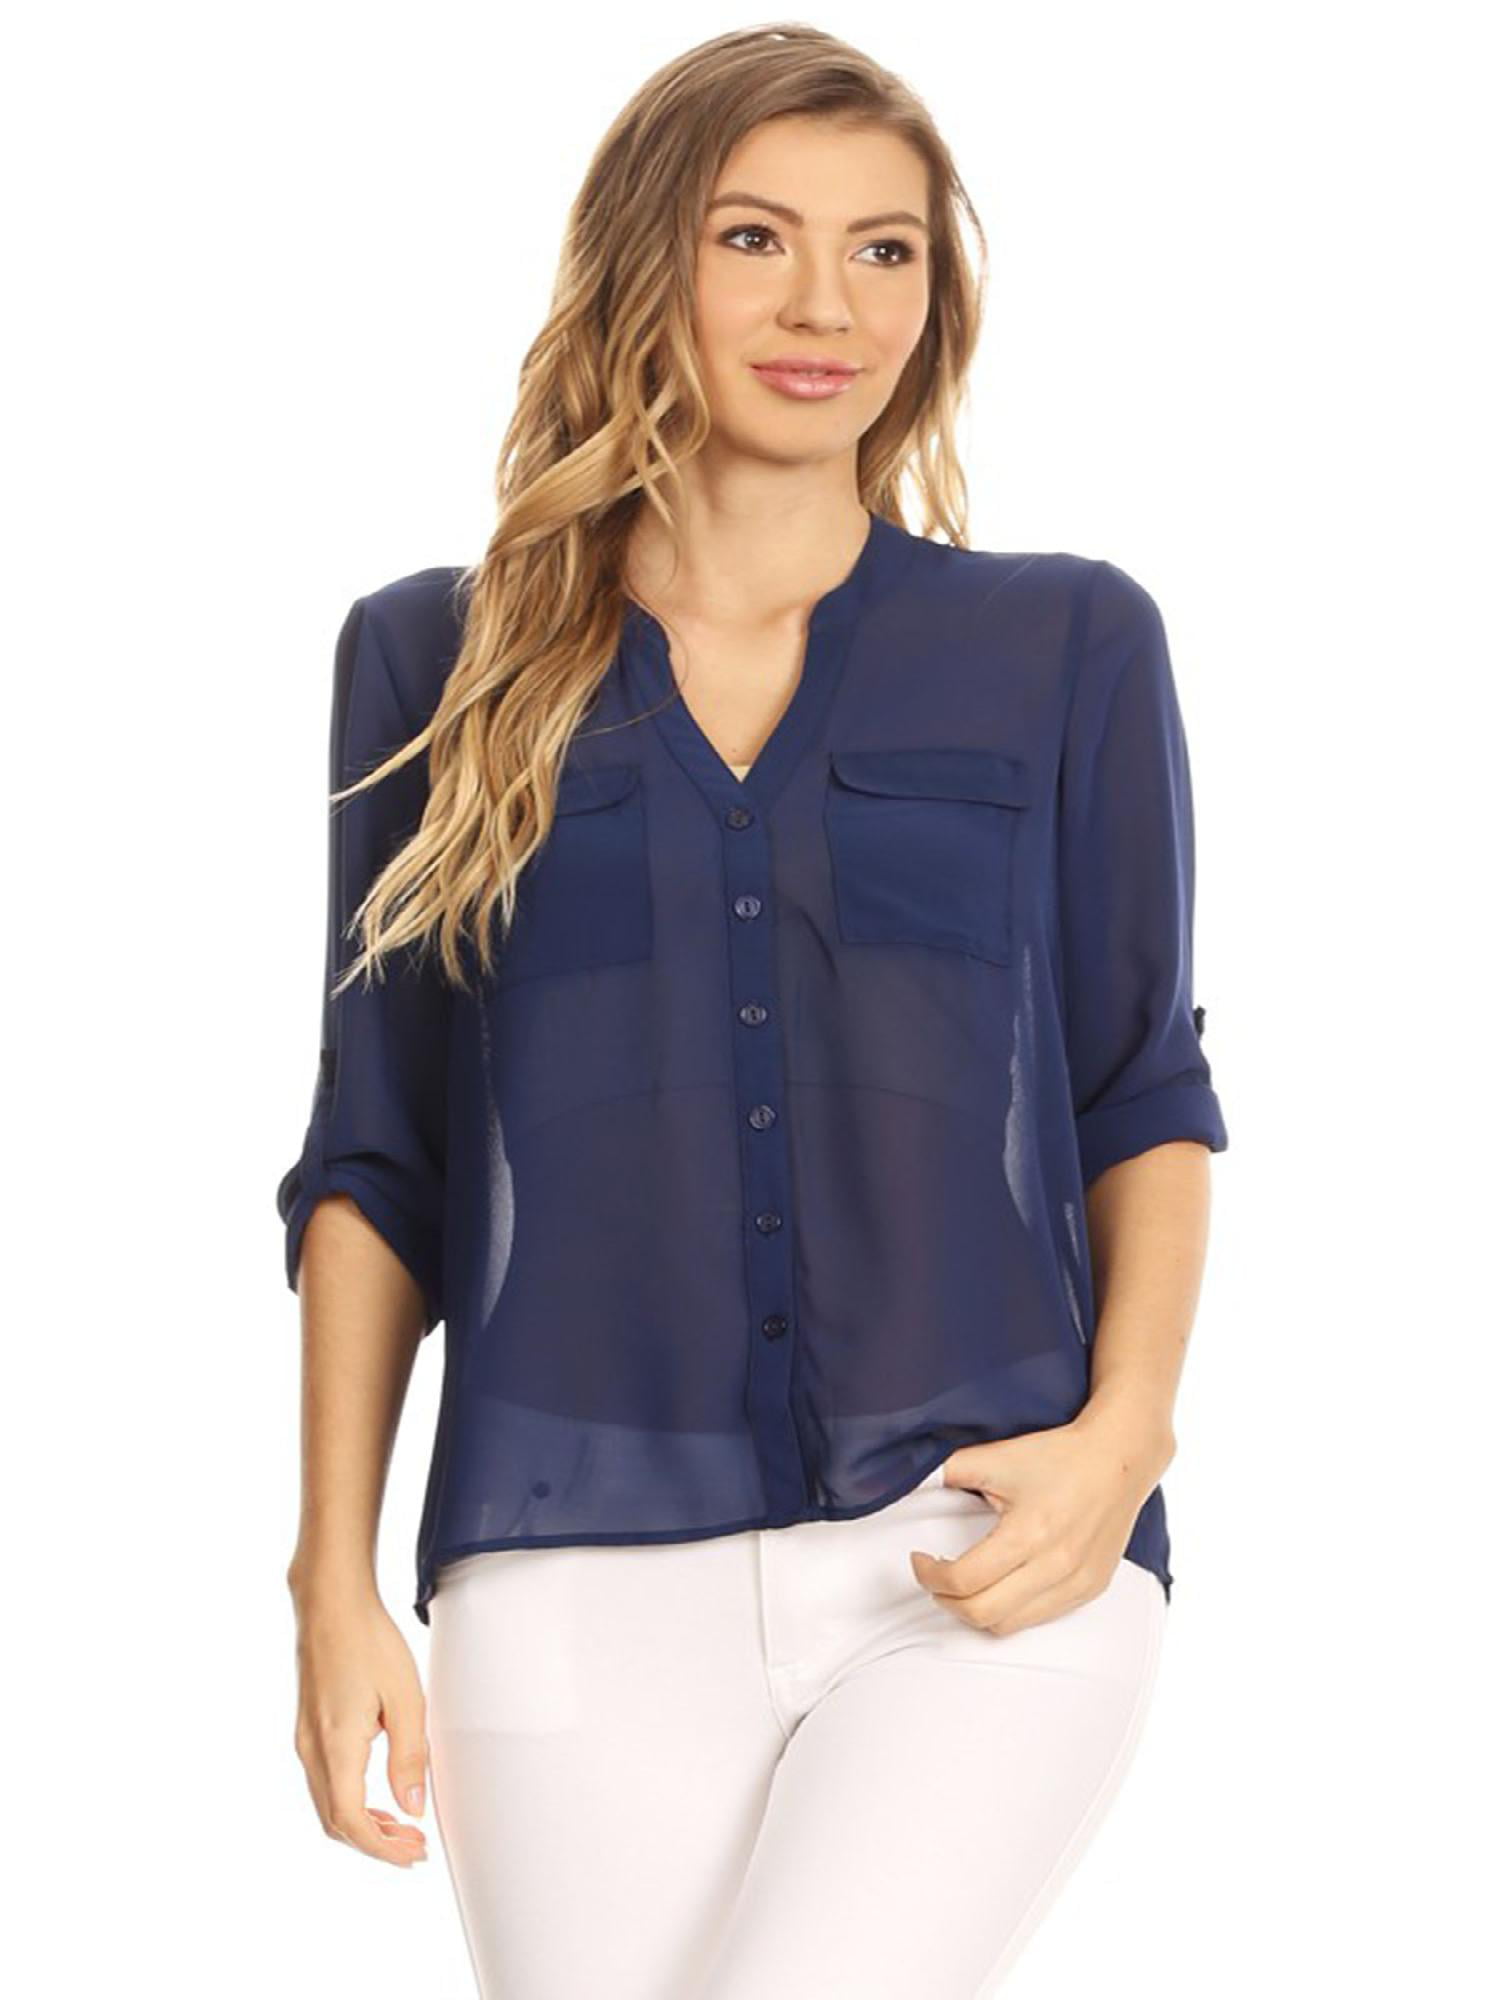 Womens button up blouses